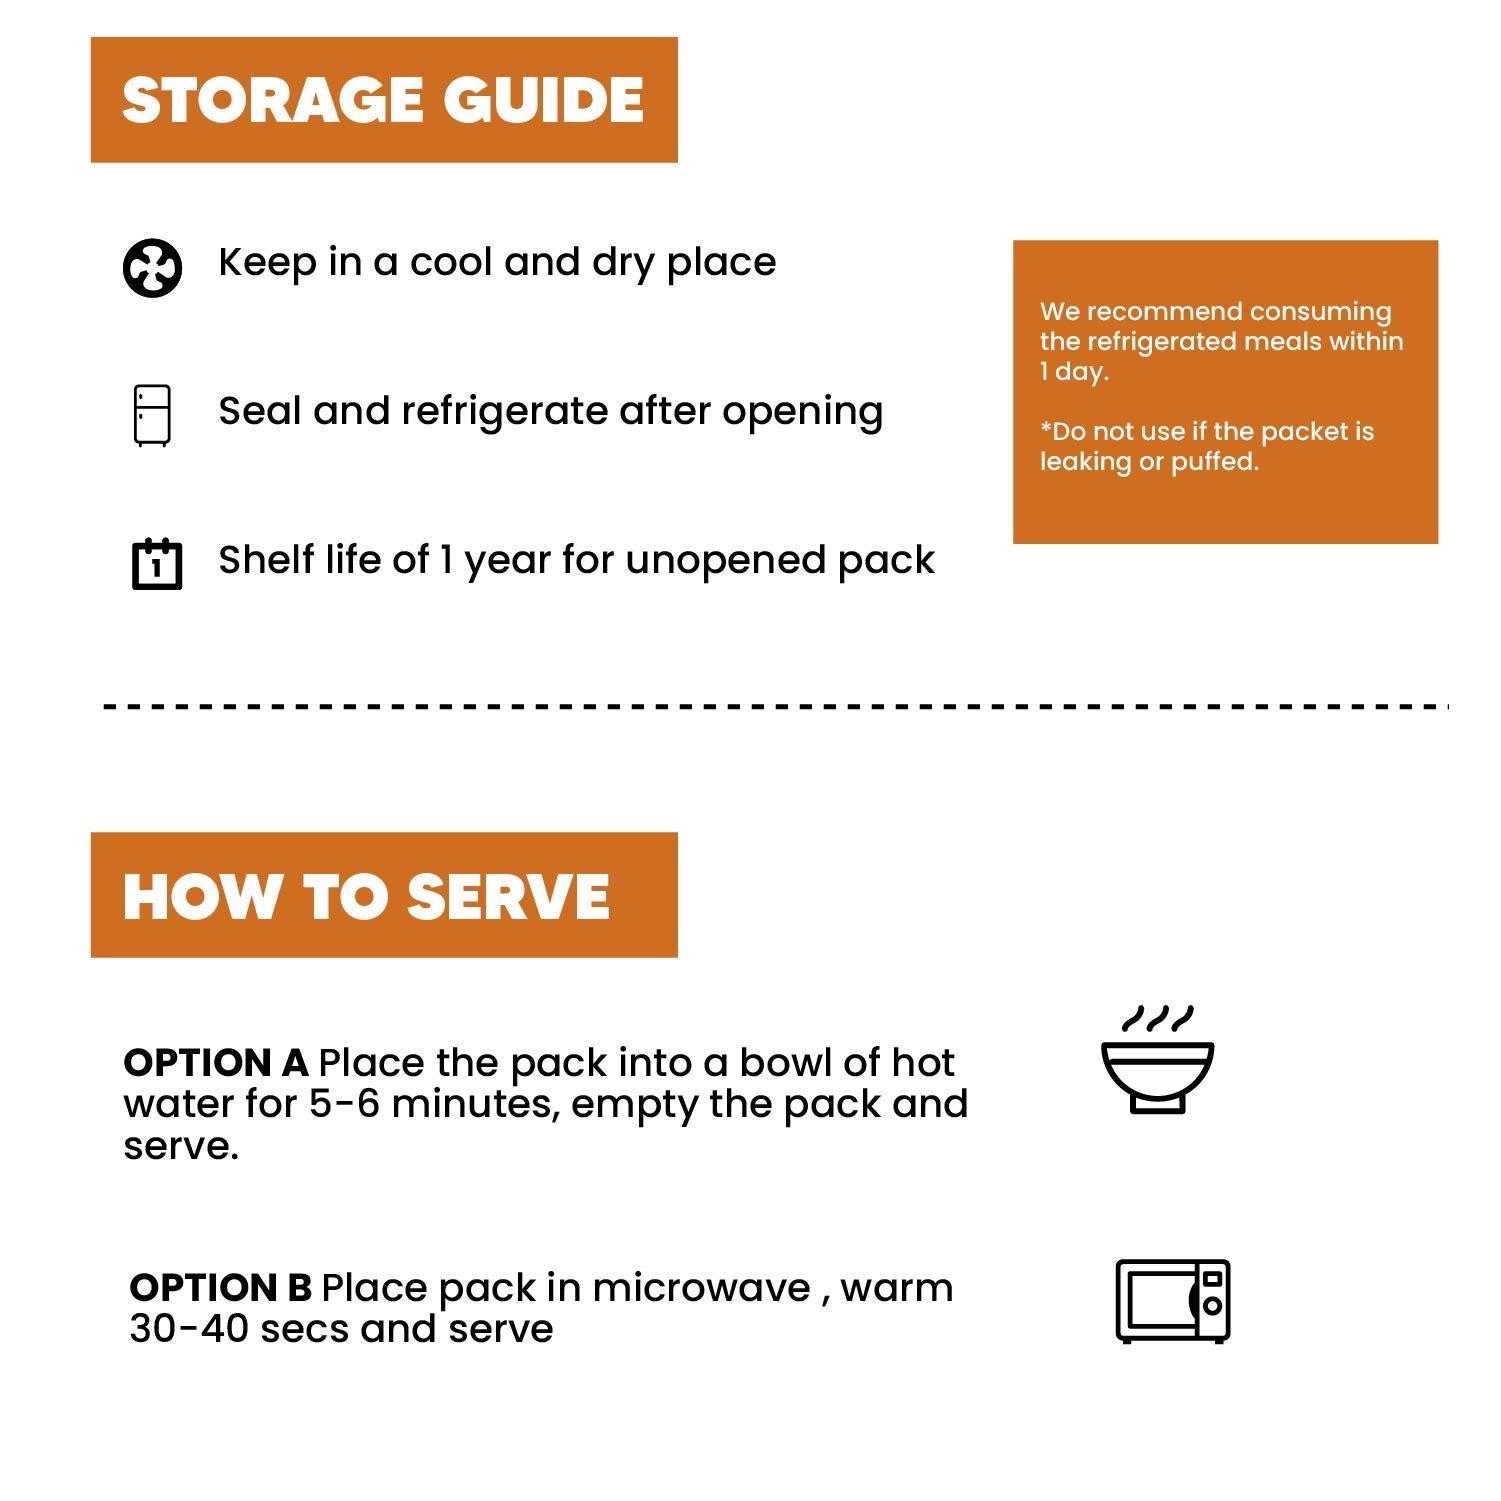 Storage and how to serve guide